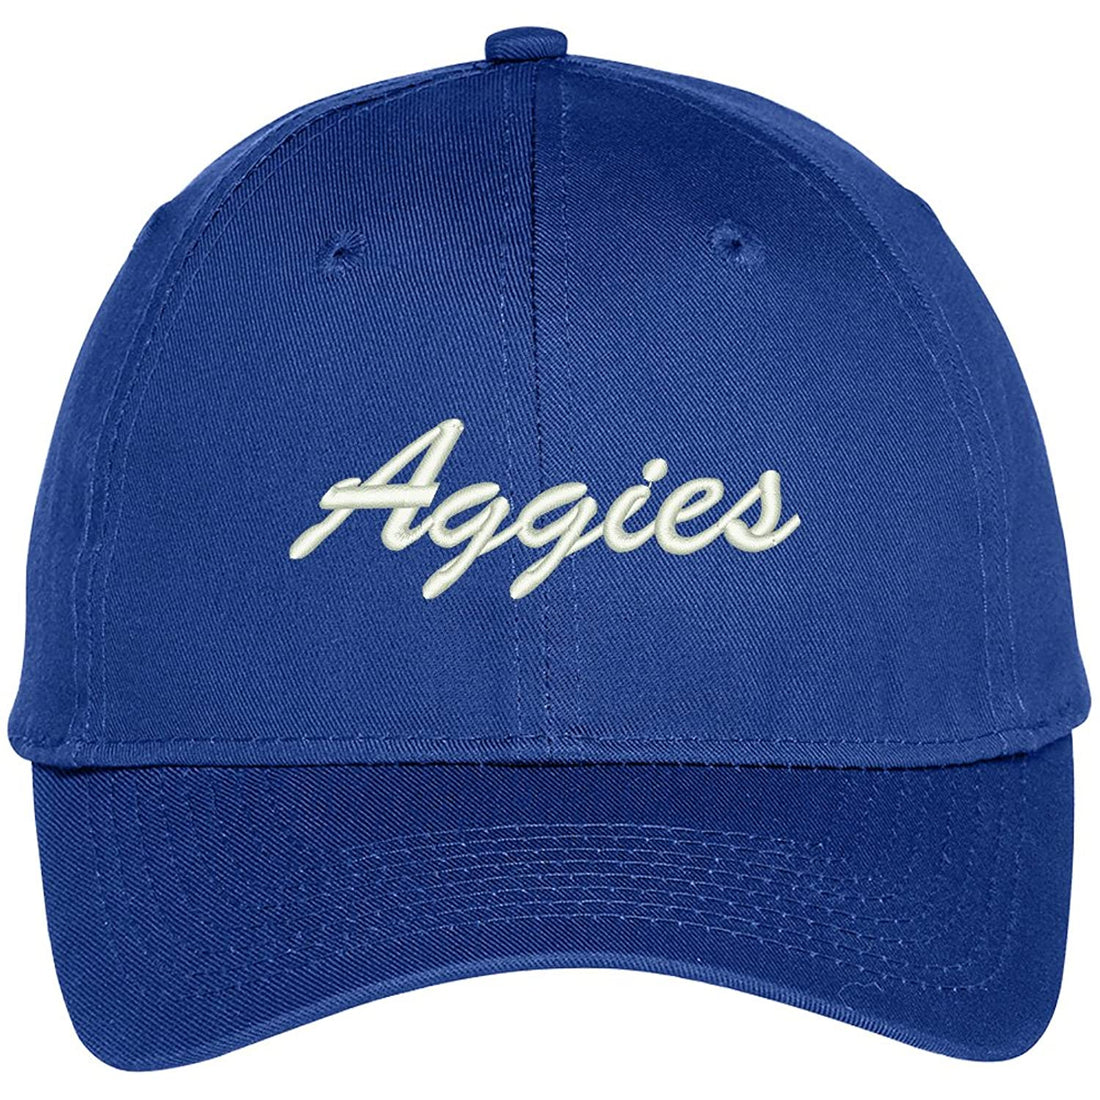 Trendy Apparel Shop Aggies Embroidered Team Nickname Mascot Cap